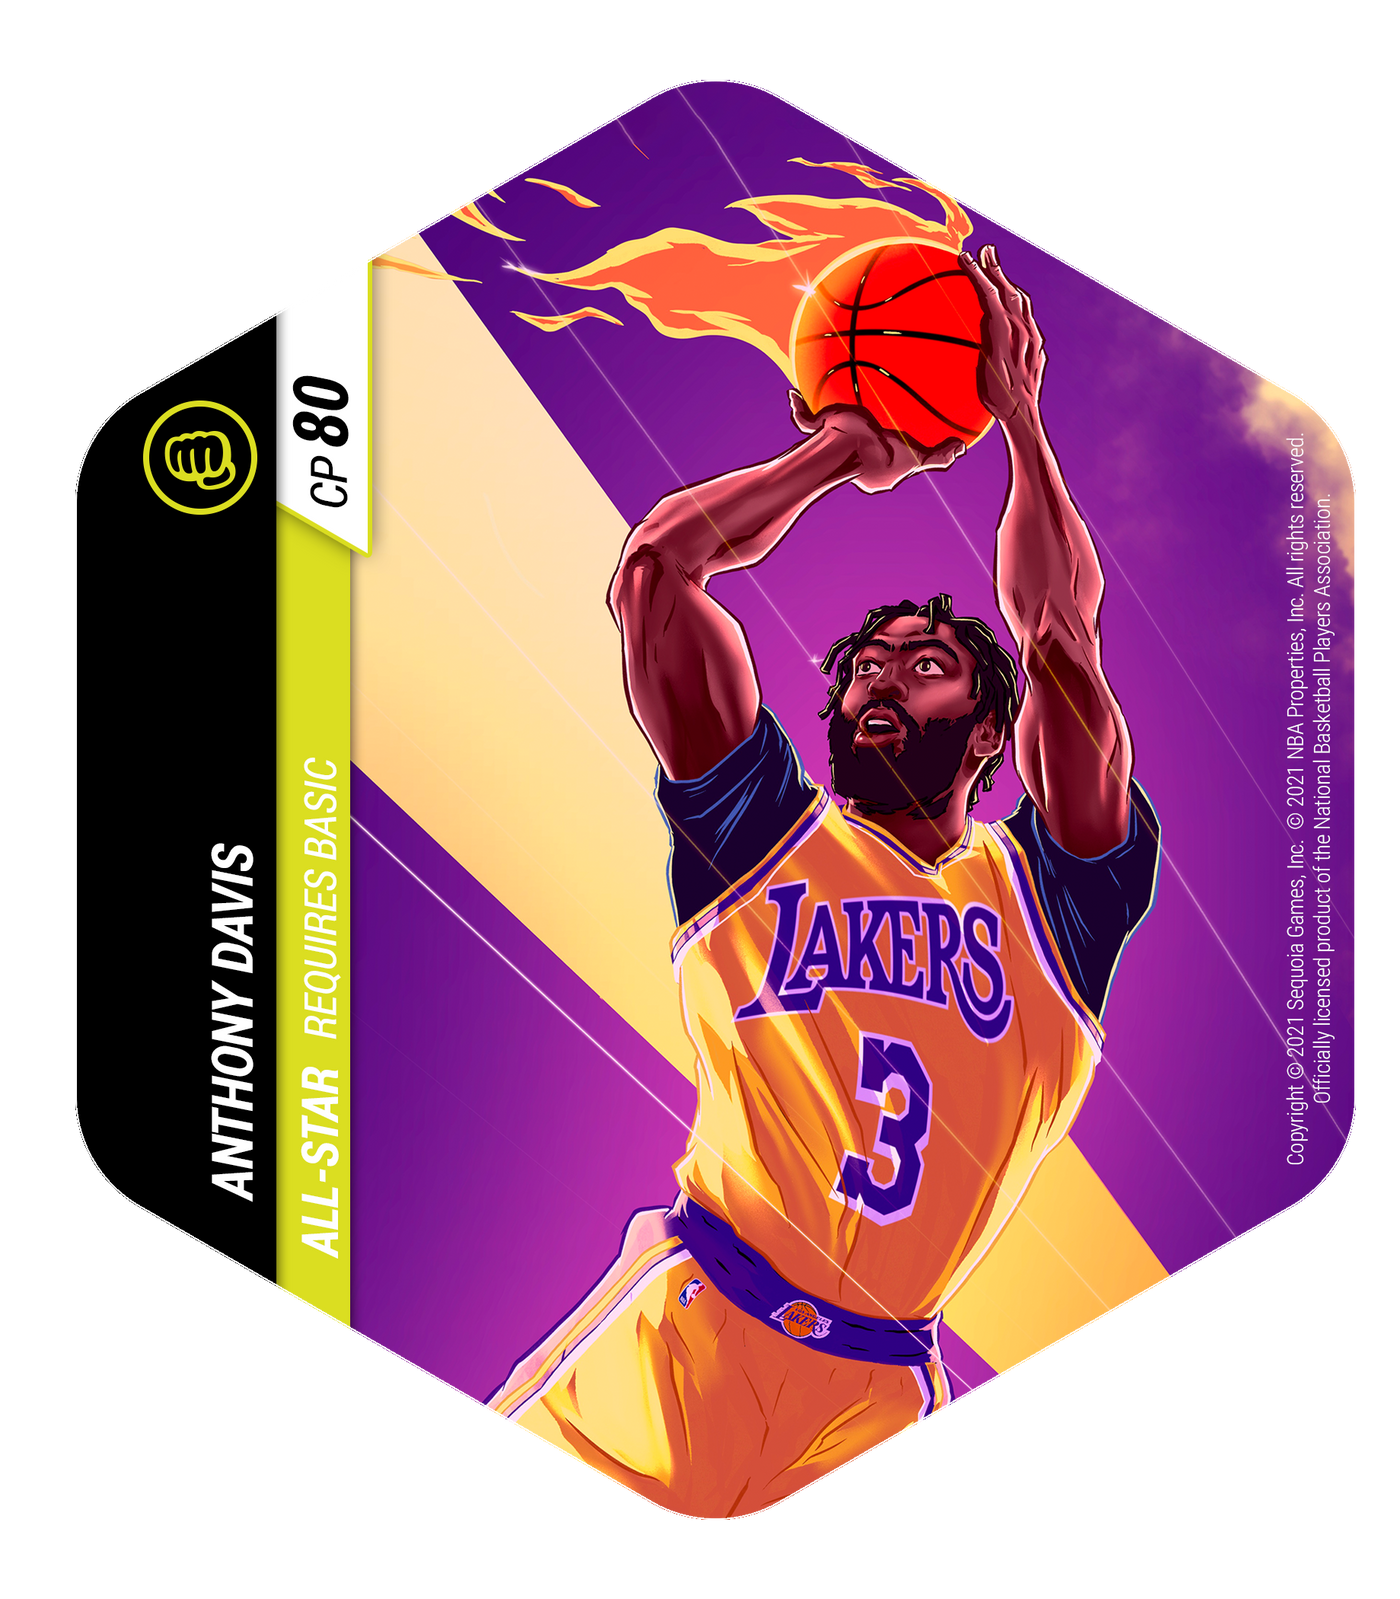 Los Angeles Lakers- (10) Card Pack NBA Basketball Different Laker  Superstars Starter Kit! Comes in Souvenir Case! Great Mix of Modern &  Vintage Players for the Super Lakers Fan! By 3bros at